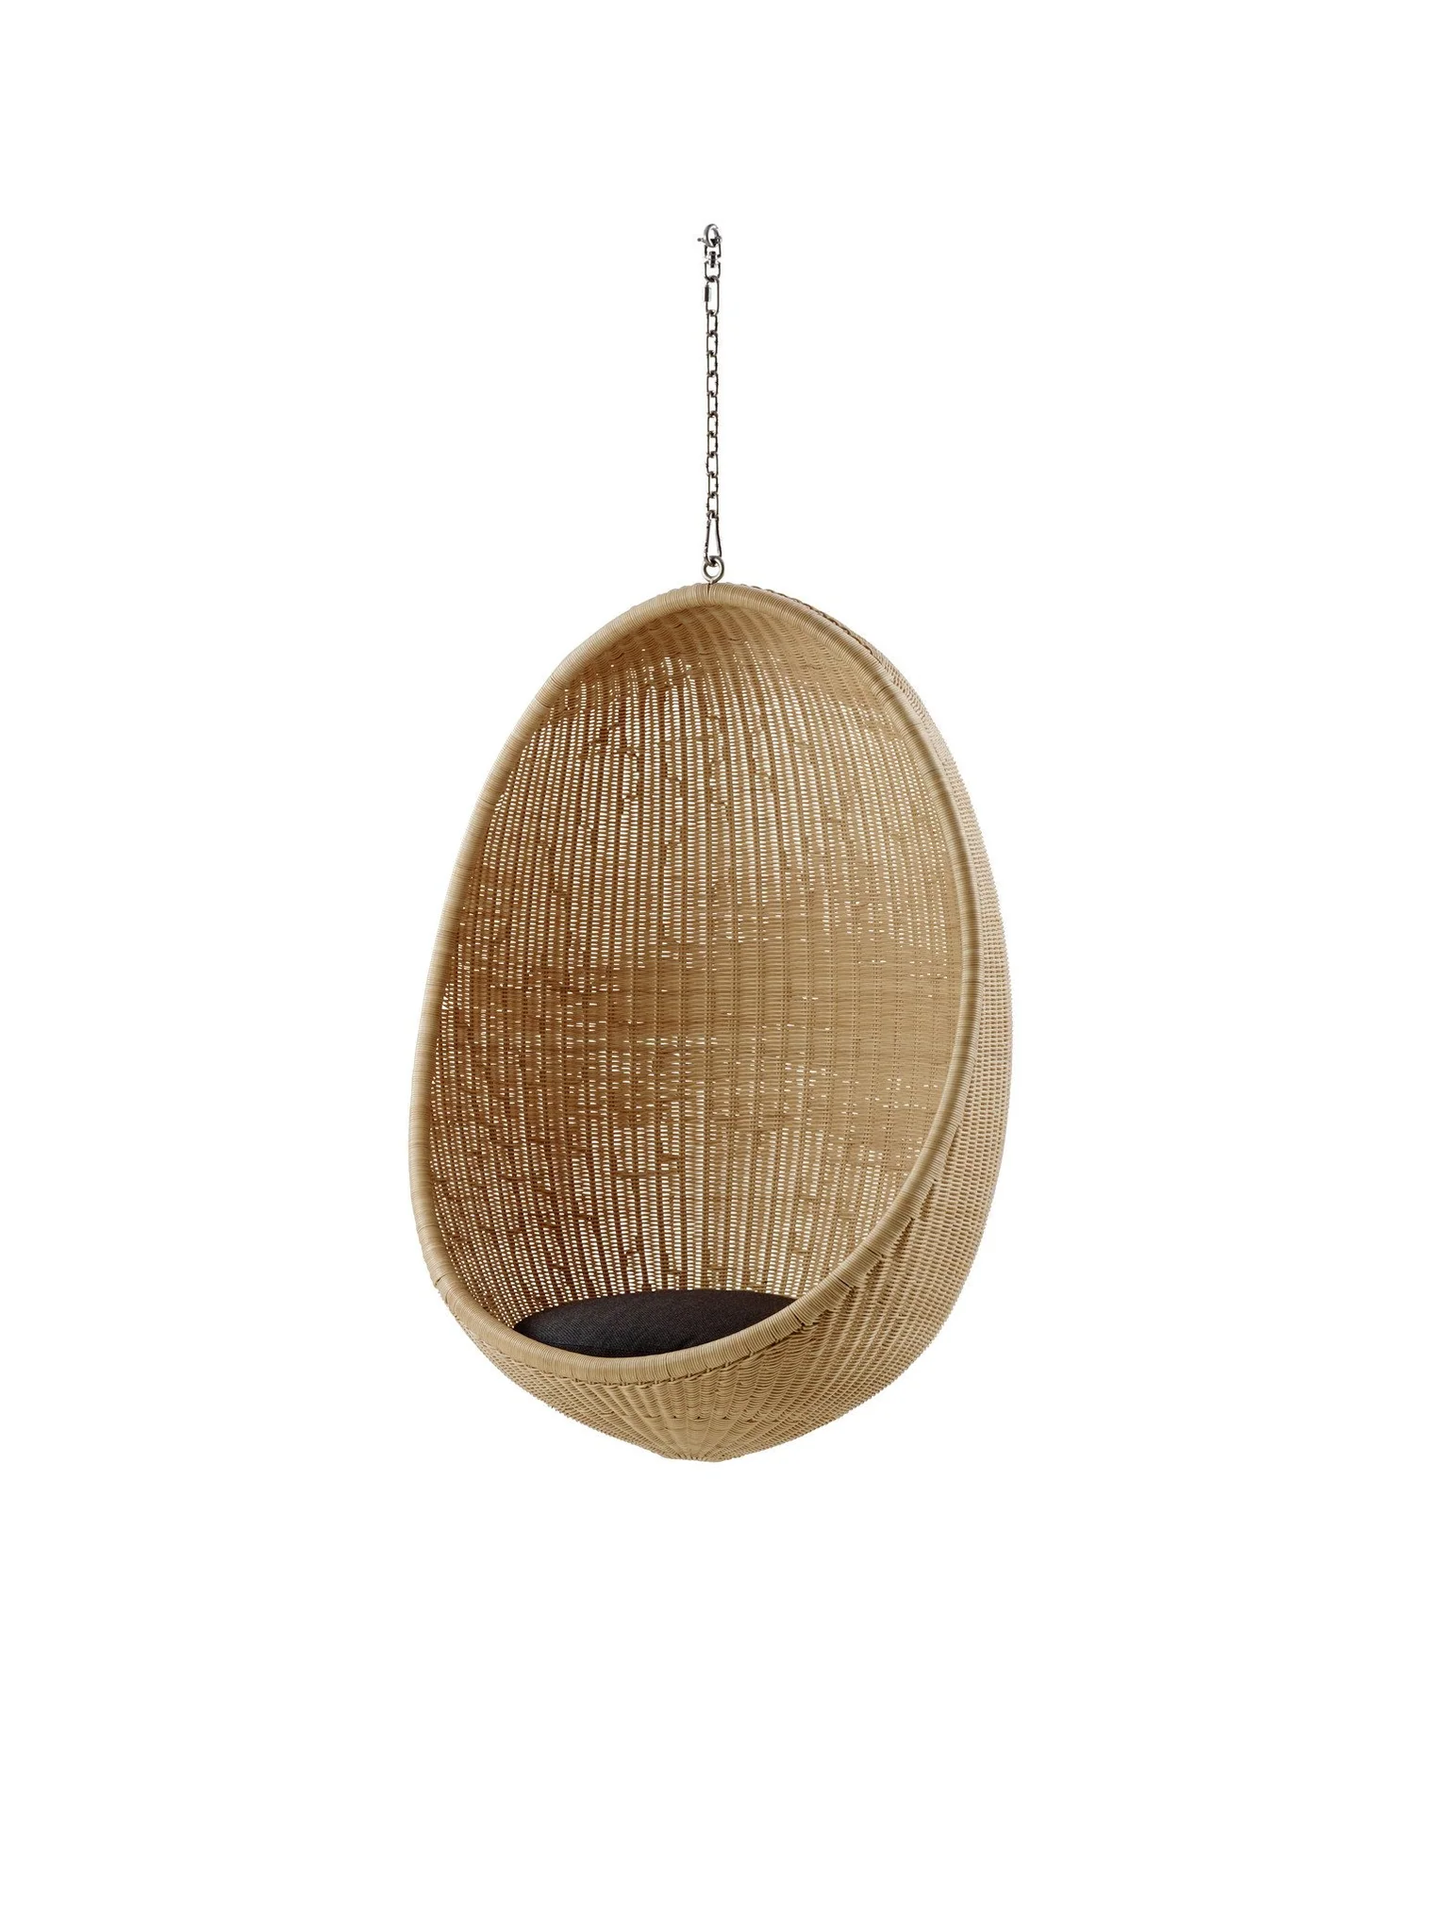 Bamboo Swing Chairs for Outdoor | Cane swing chairs - Kashvi - Akway